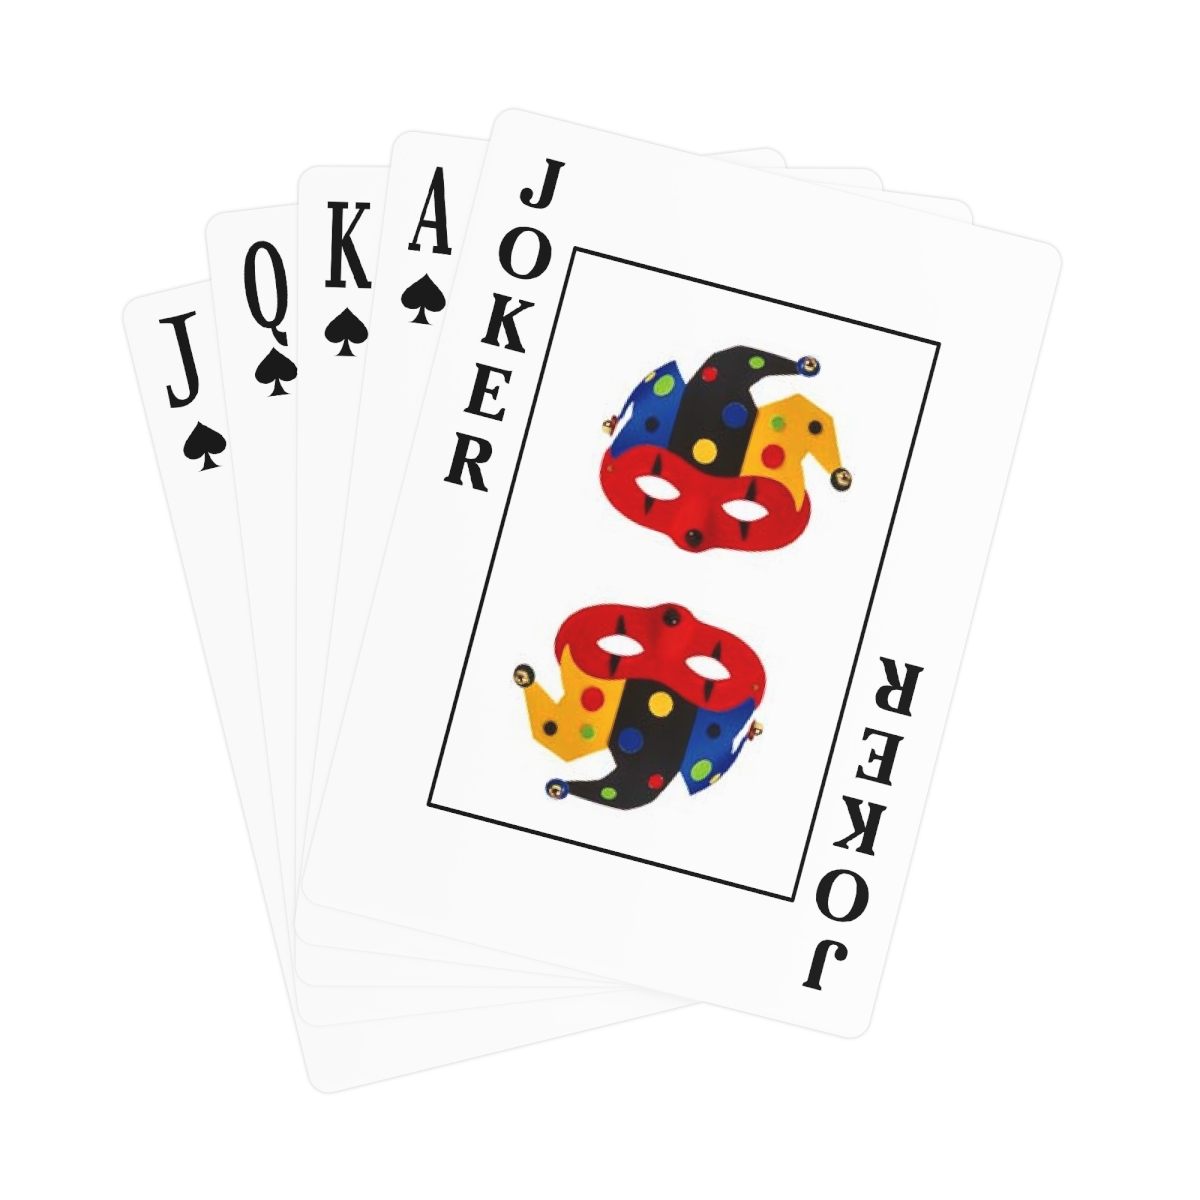 Night Creature Productions Alternate Logo  Poster Poker Cards product thumbnail image